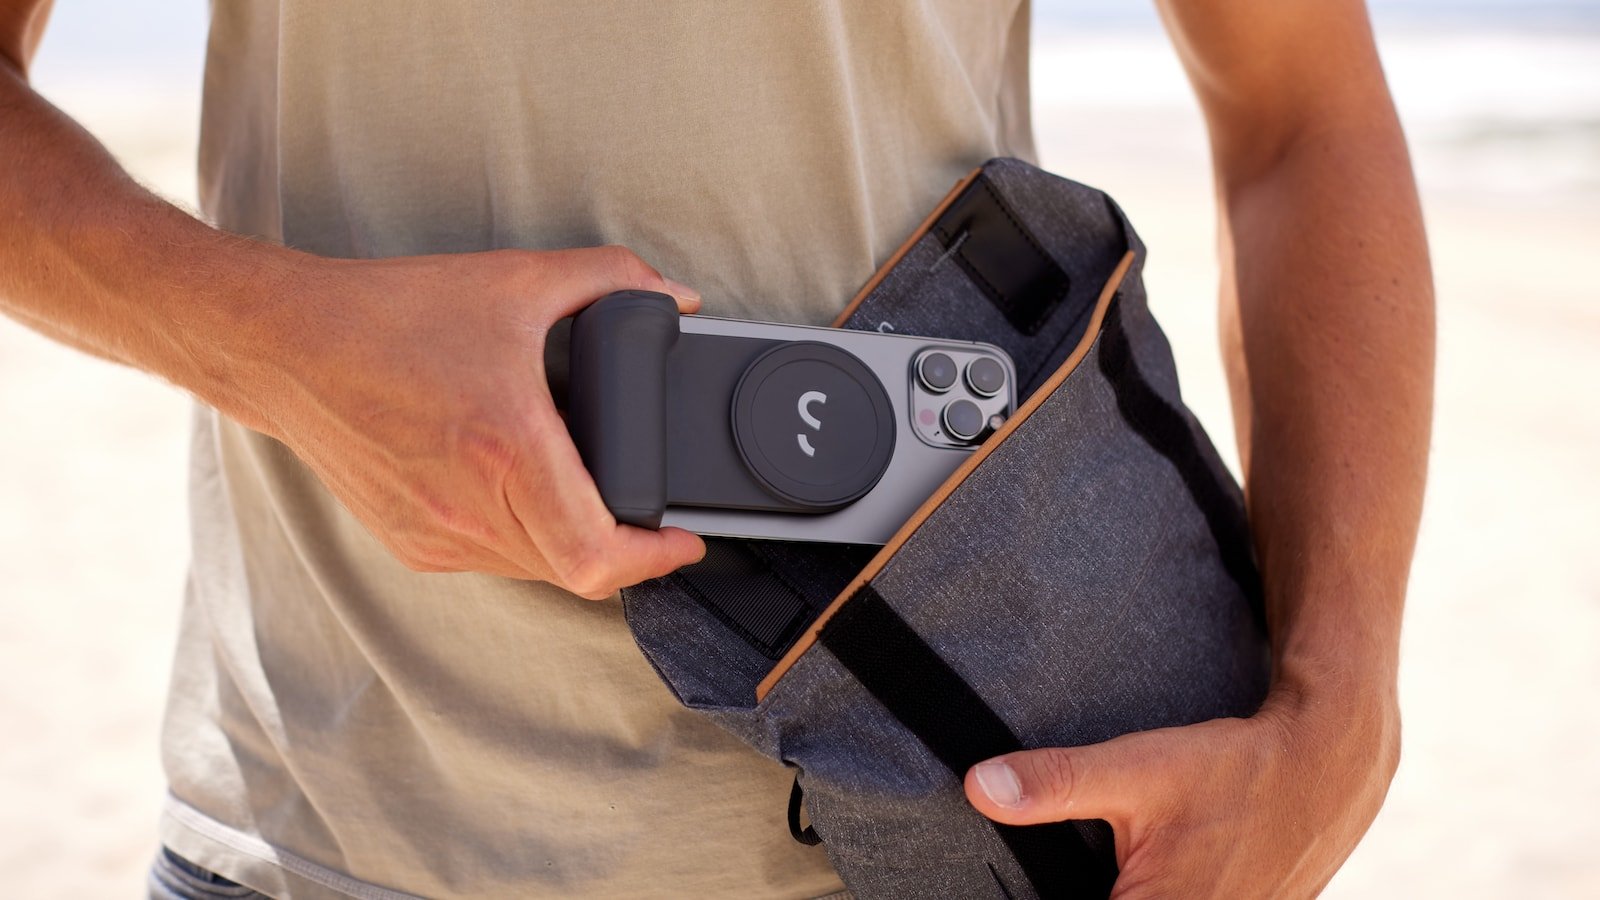 ShiftCam SnapGrip magnetic snap-on mobile battery grip integrates into your creative setup